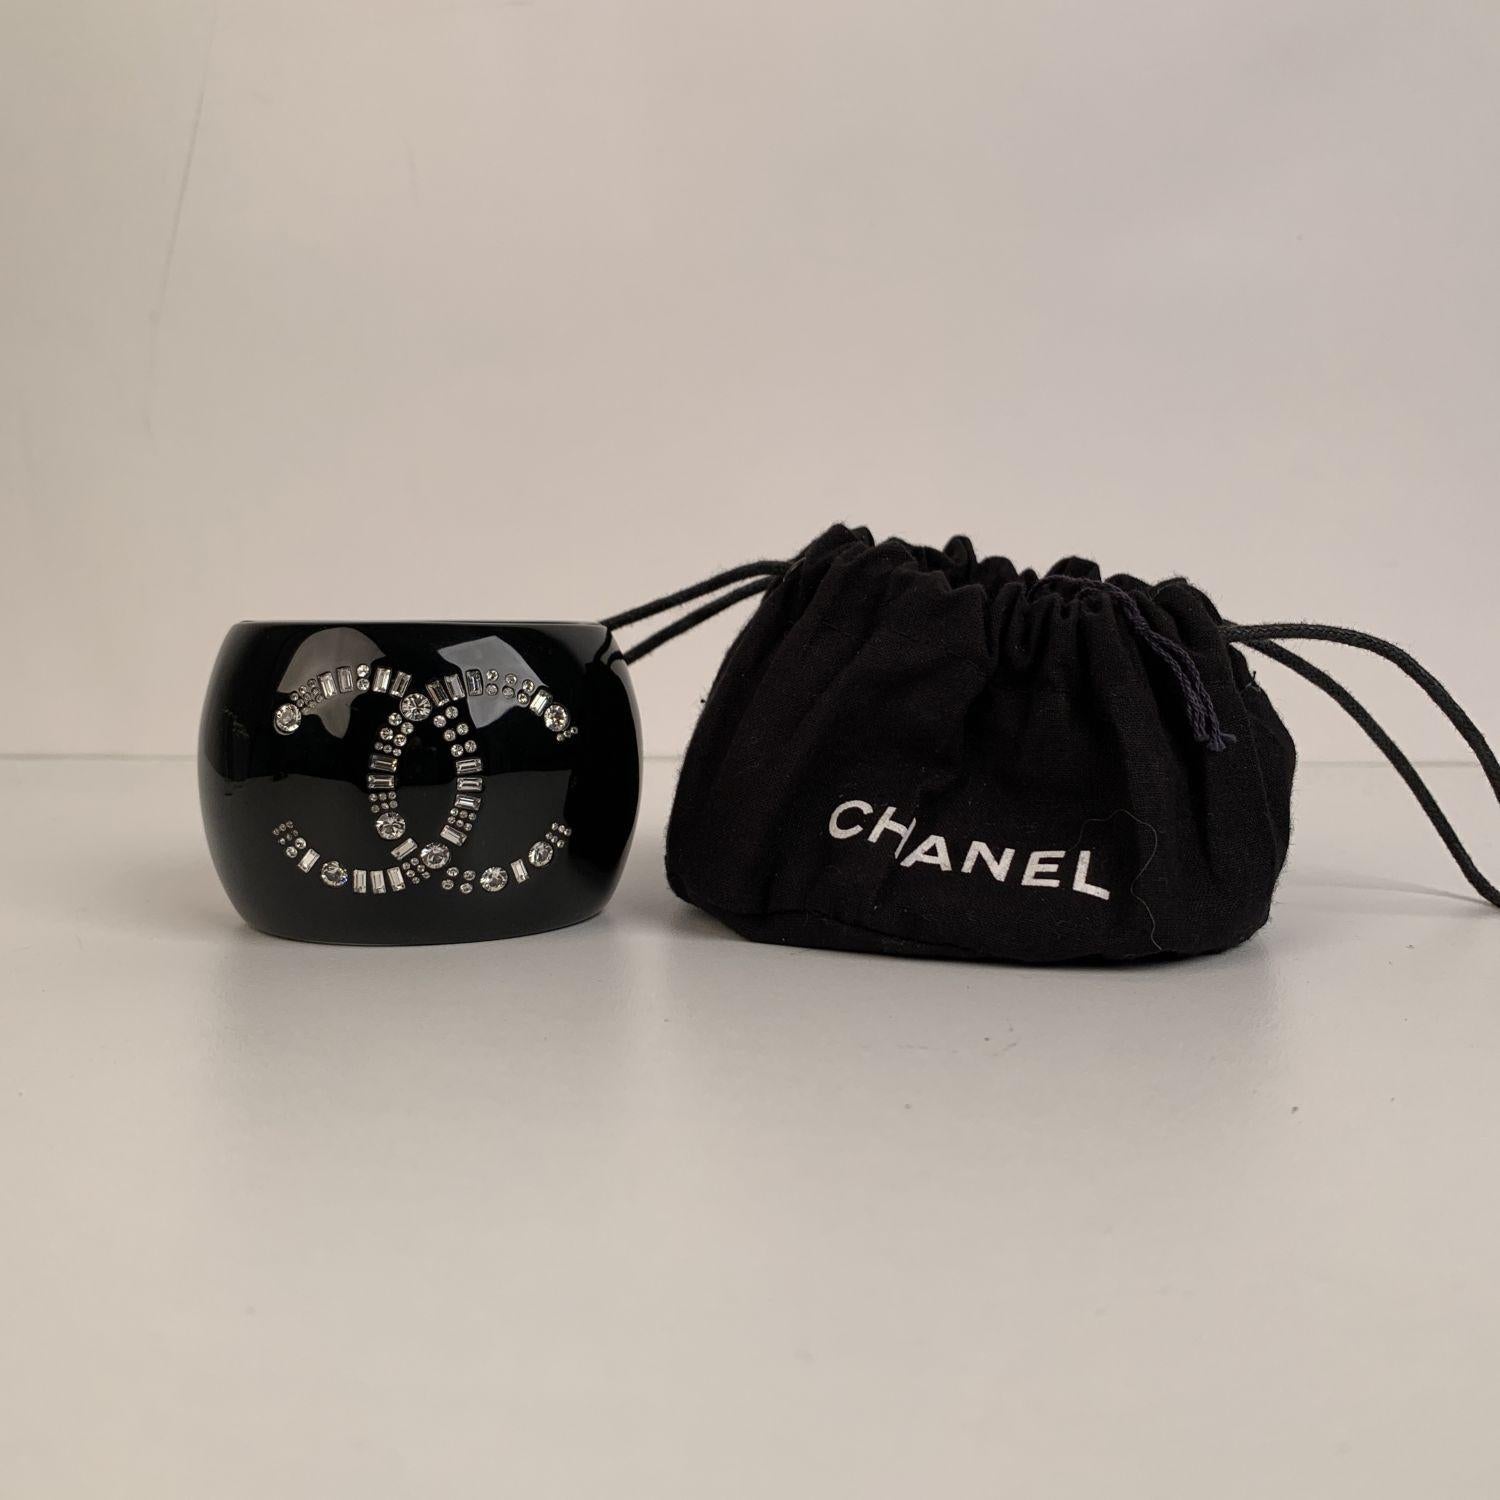 Lovely large cuff bracelet by CHANEL. Black resin with crystal CC logo at center. Hinge opening with magnetic clasp closure Stamped 'Chanel 09 CC A Made in France' internally. Height: 2.25 inches - 5,7 cm. Will fit up to approx. 6.5 inches - 16.5 cm